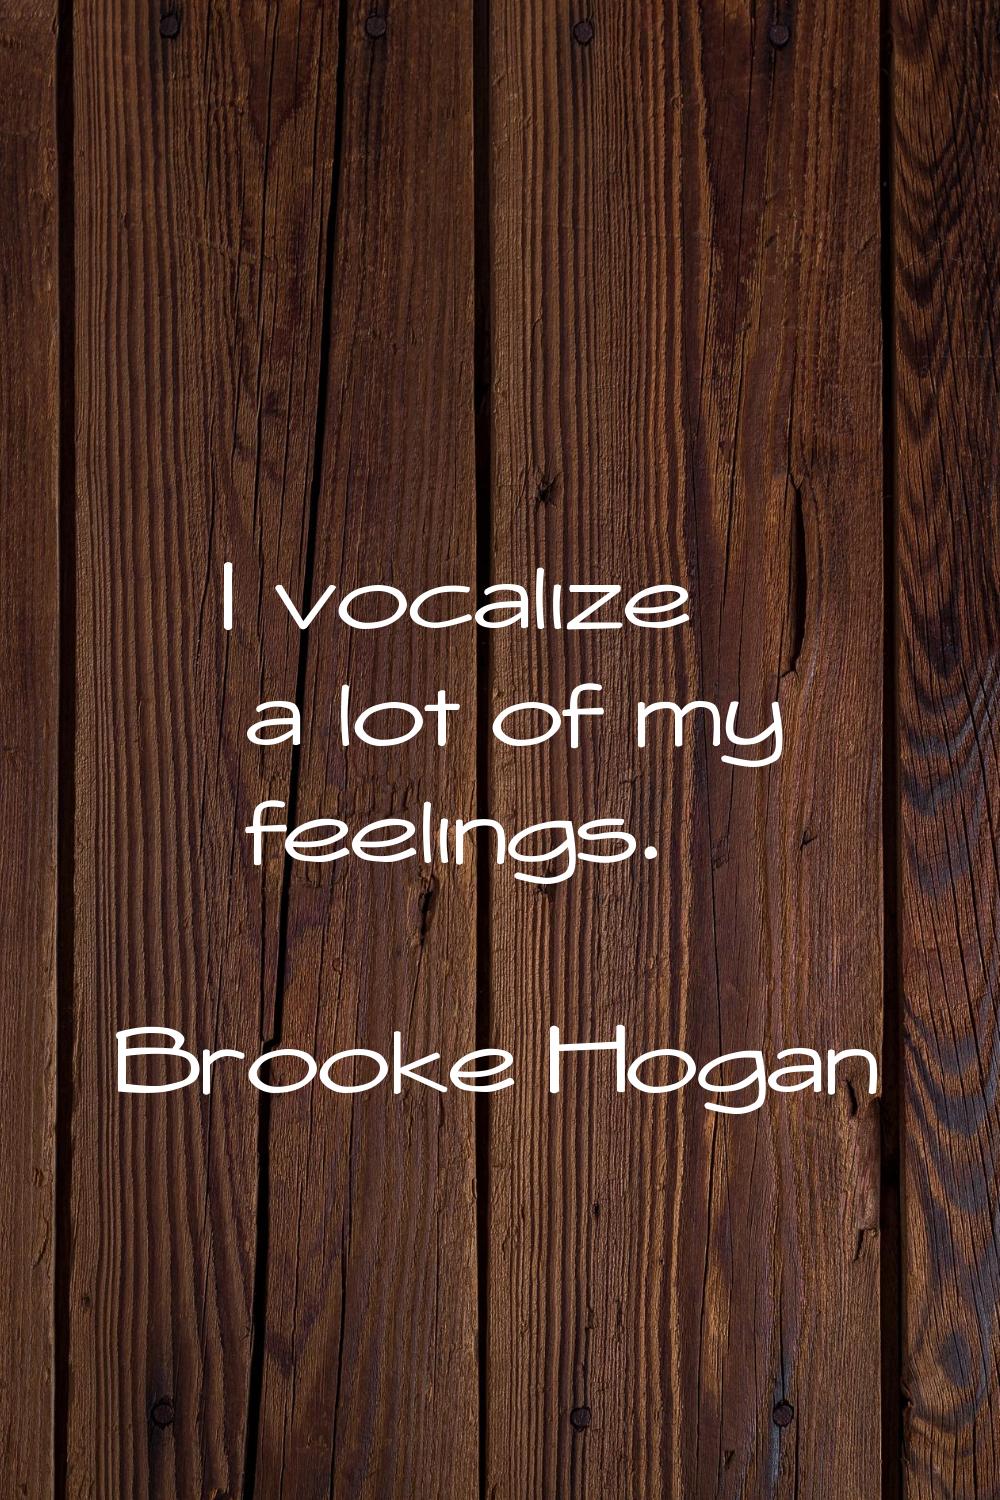 I vocalize a lot of my feelings.